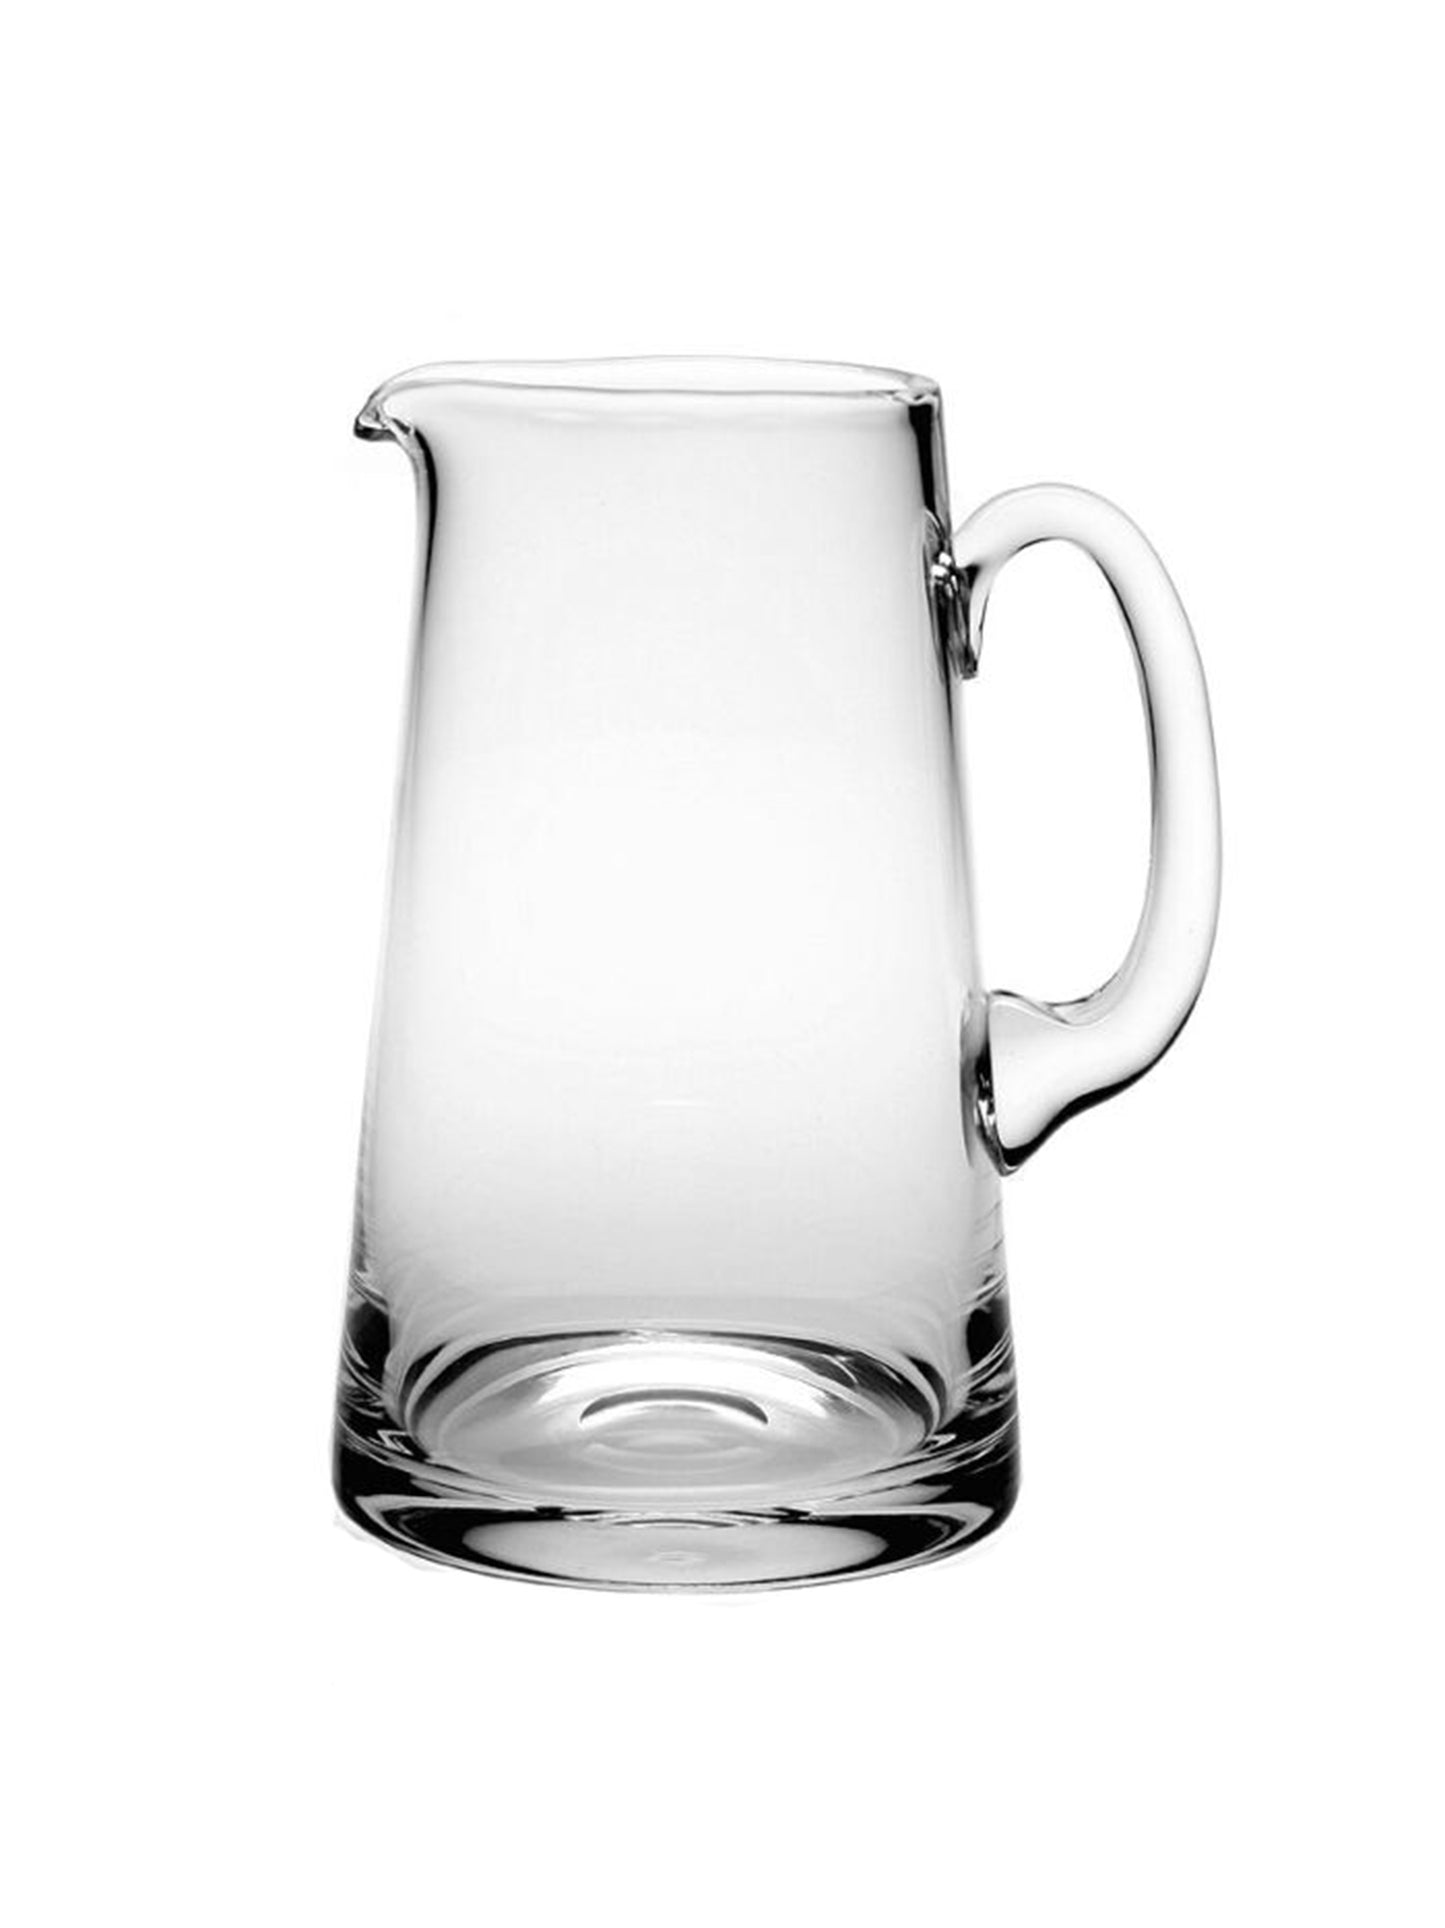 William Yeoward Crystal Classic Pitcher 2 Pint Weston Table